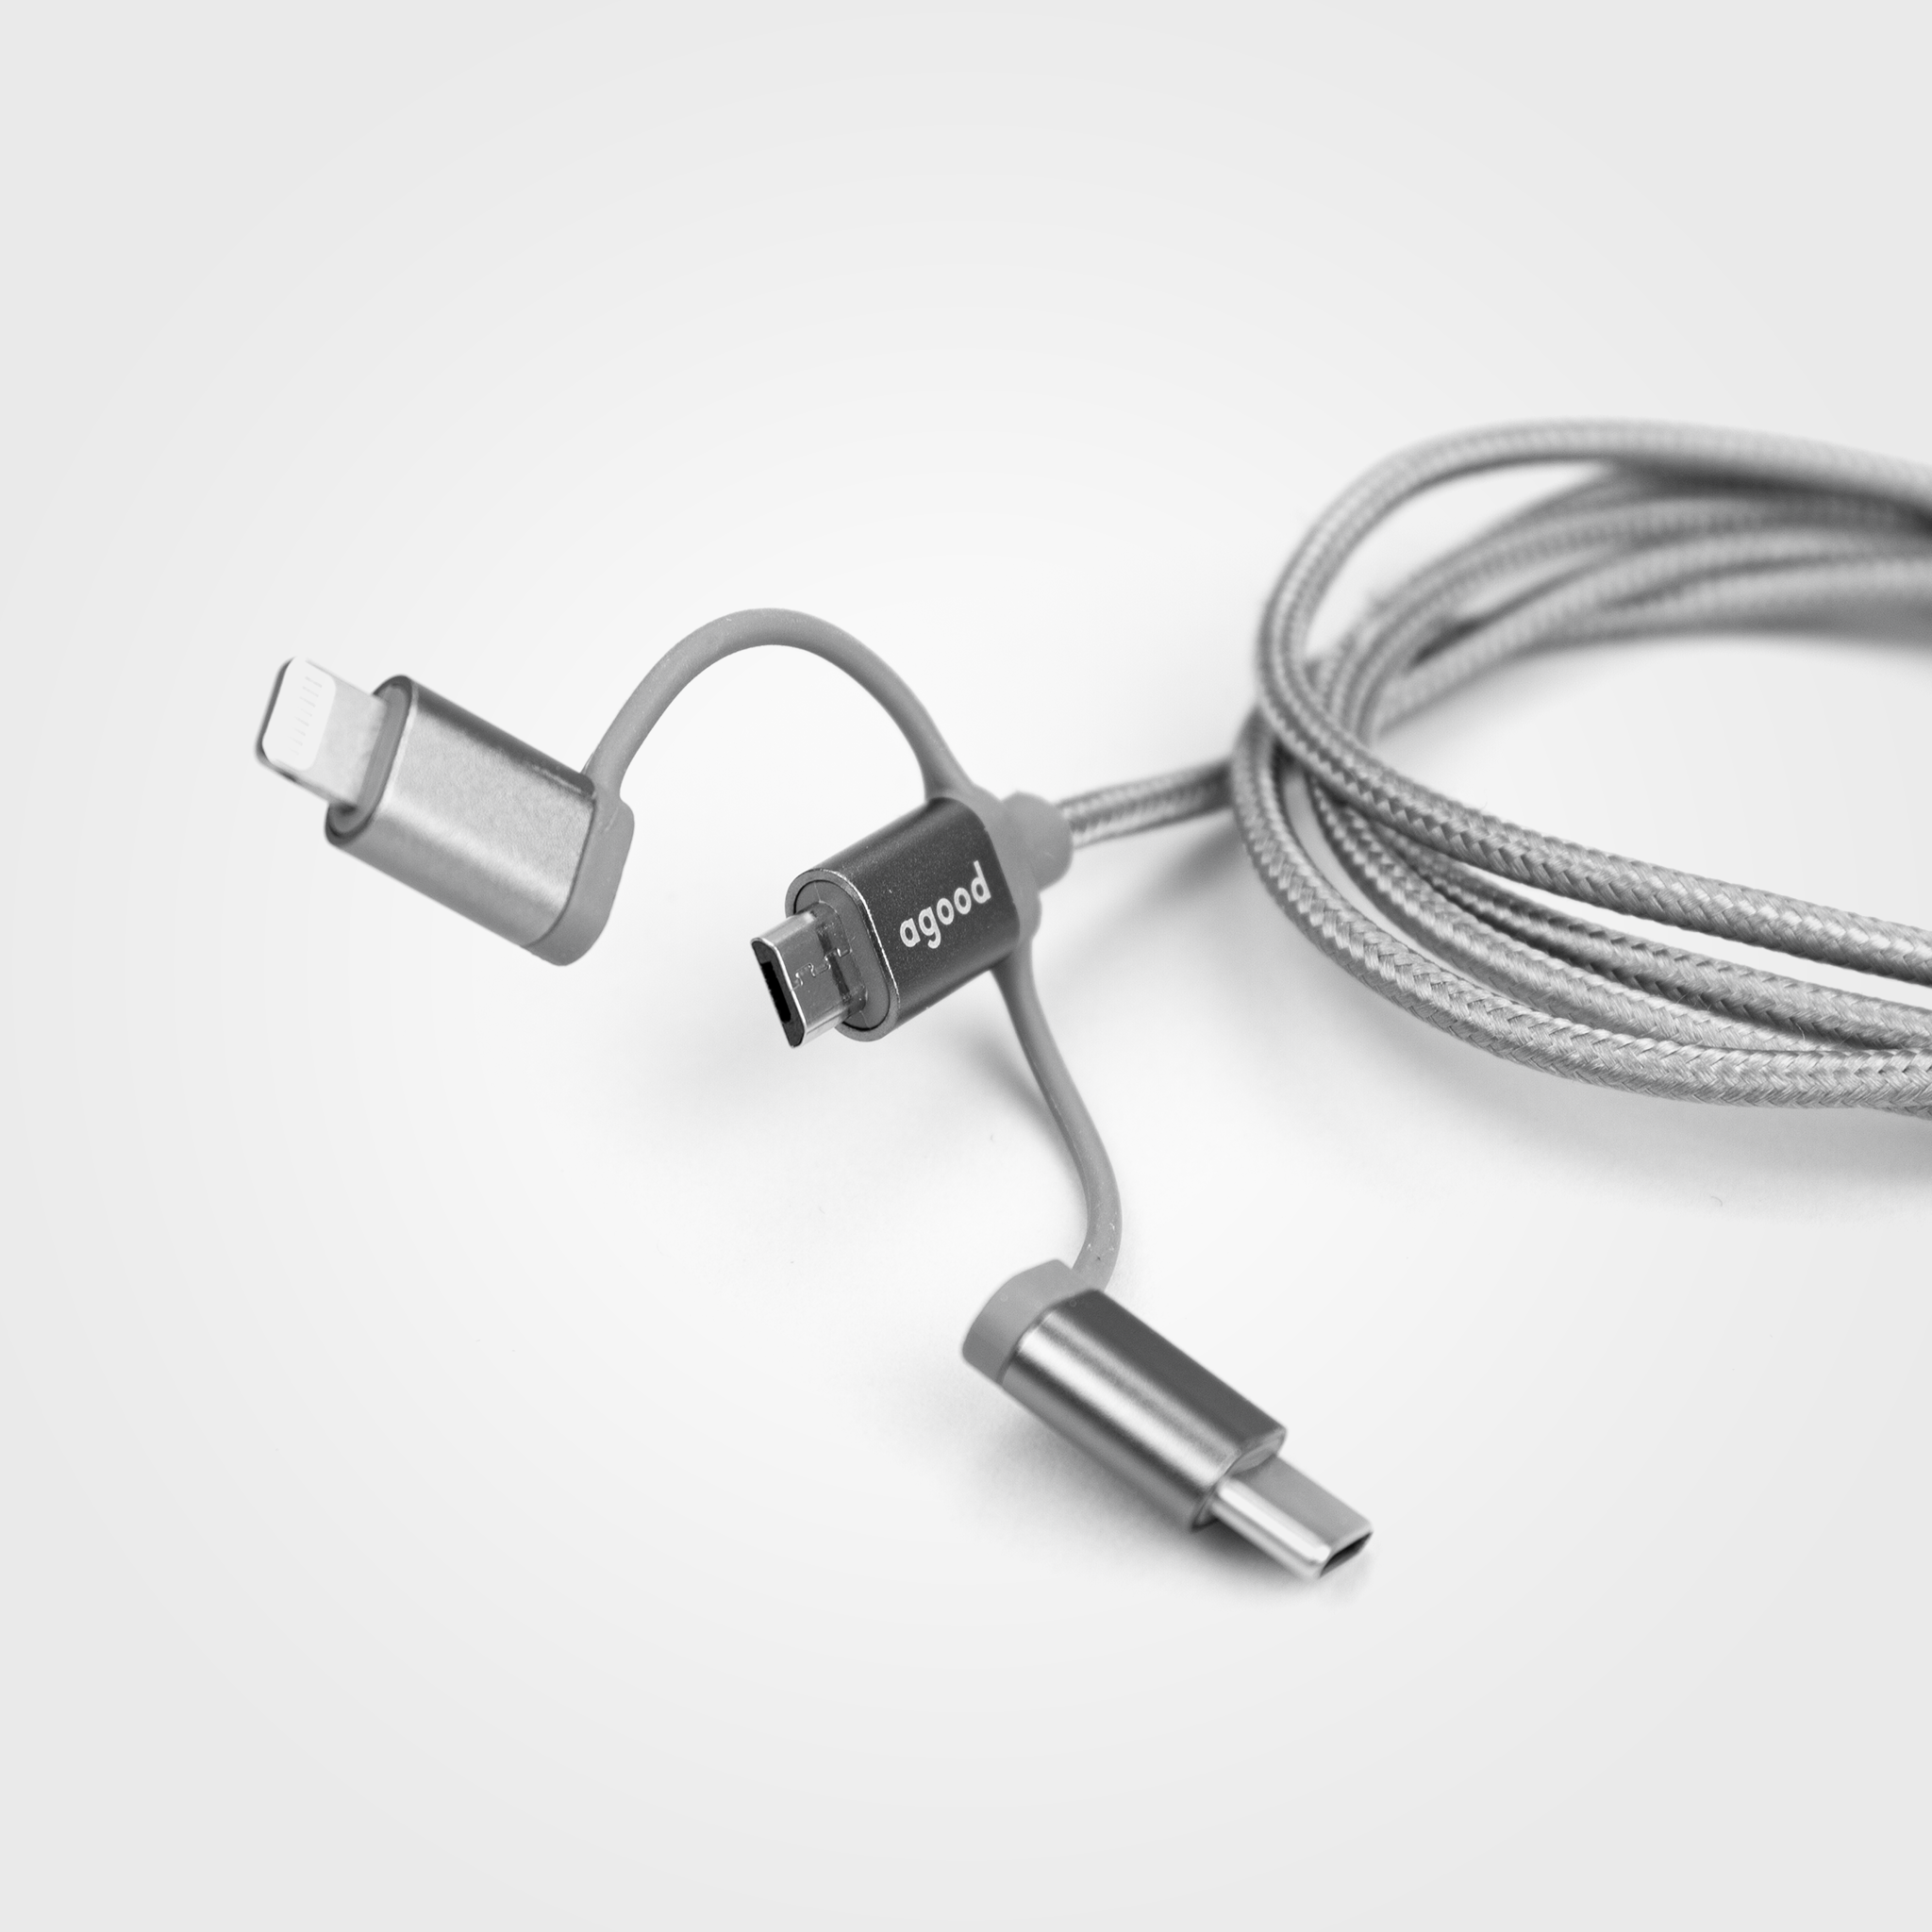 Multi-charging Cable from Recycled Materials from agood company